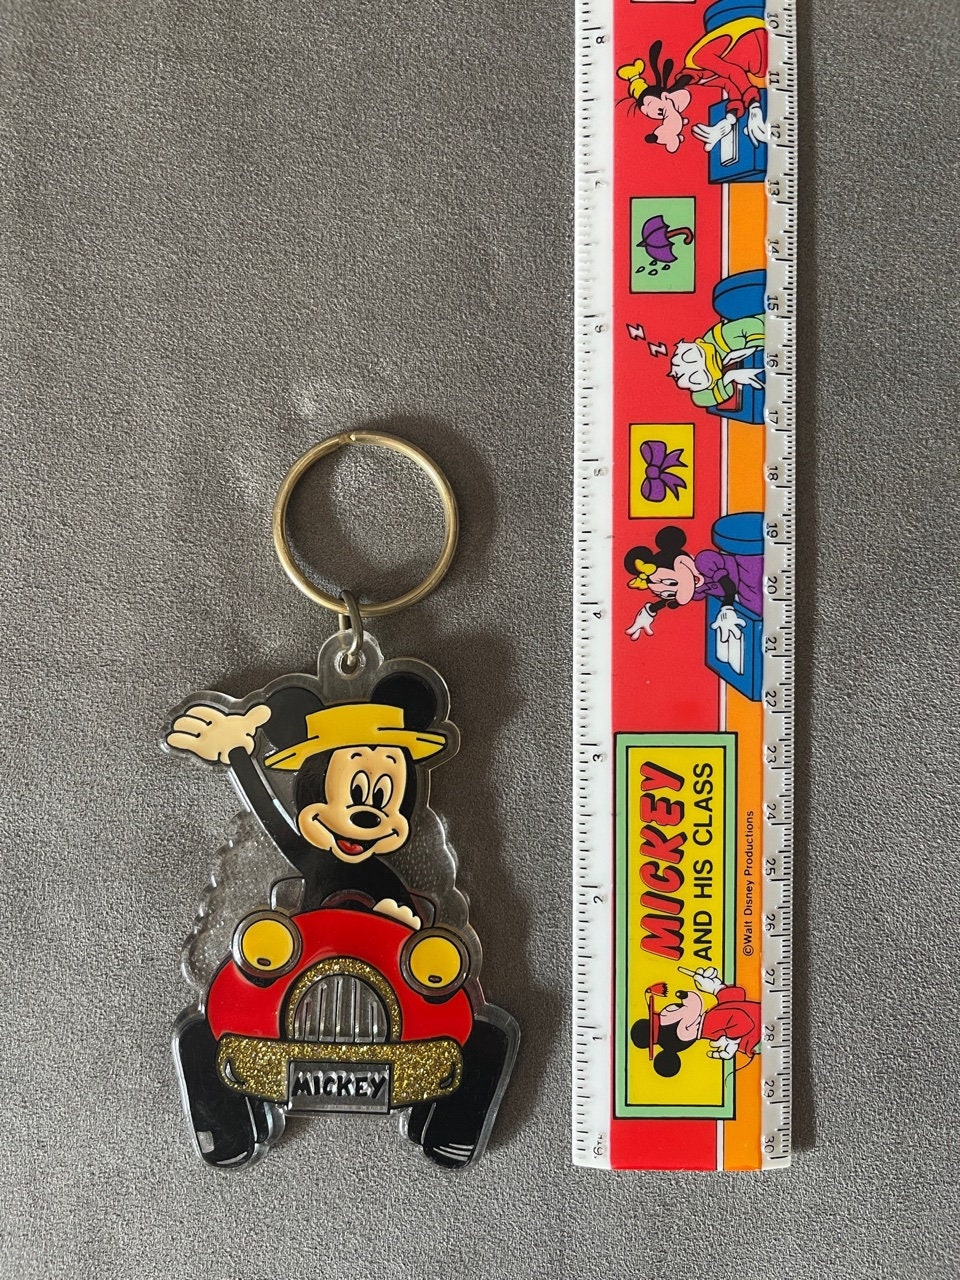 Glitter Acrylic Driving Mickey Mouse New Old Stock Vintage 